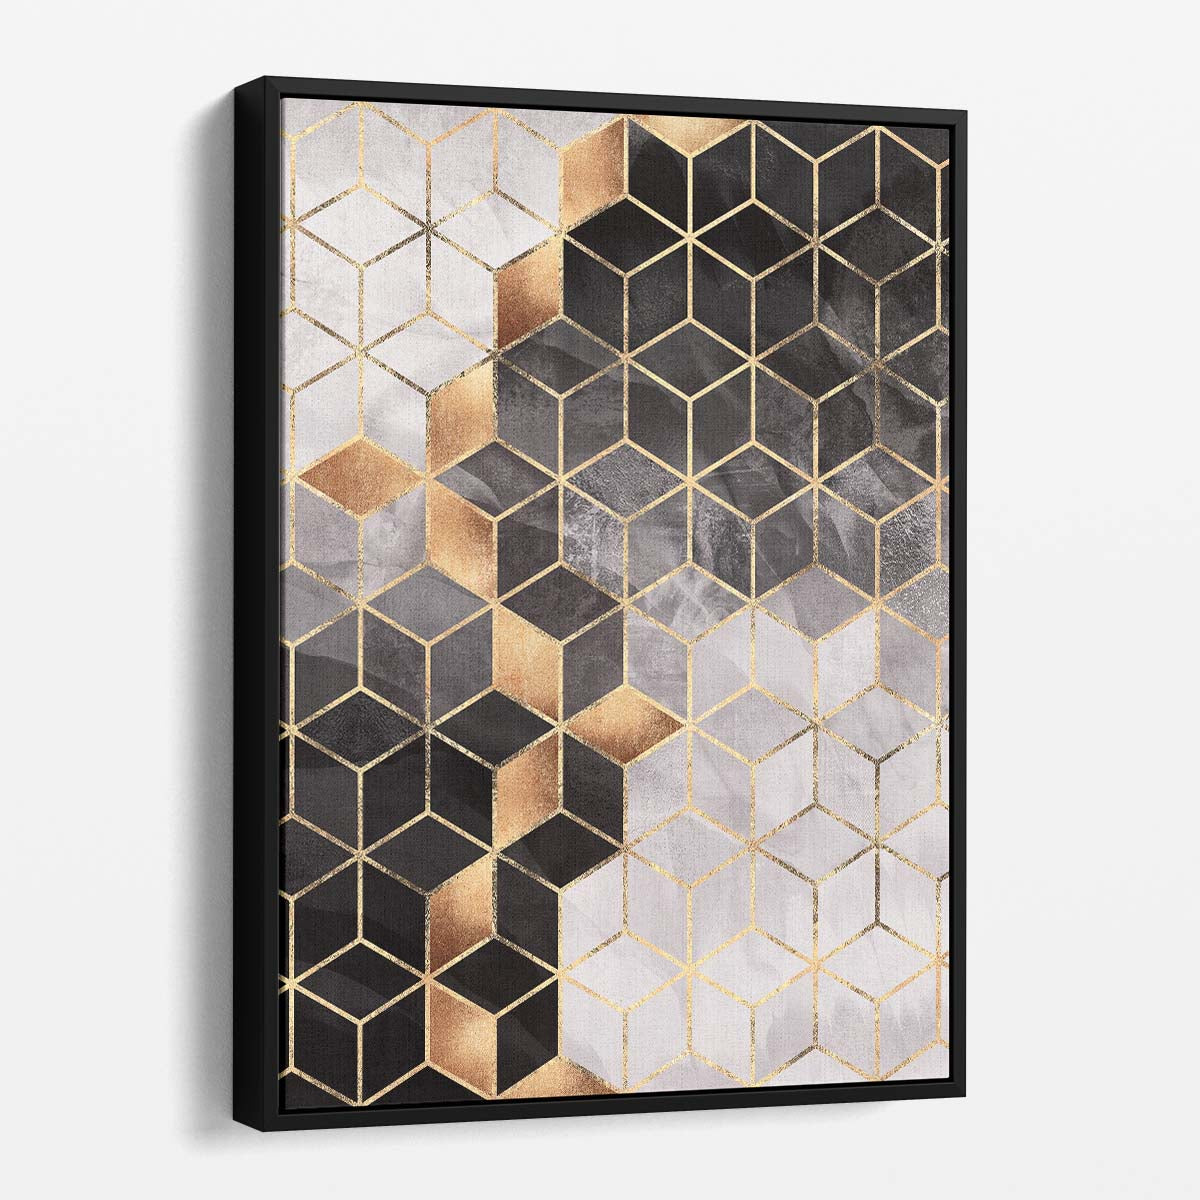 Elisabeth Fredriksson Golden Geometric Cube Illustration Wall Art by Luxuriance Designs, made in USA